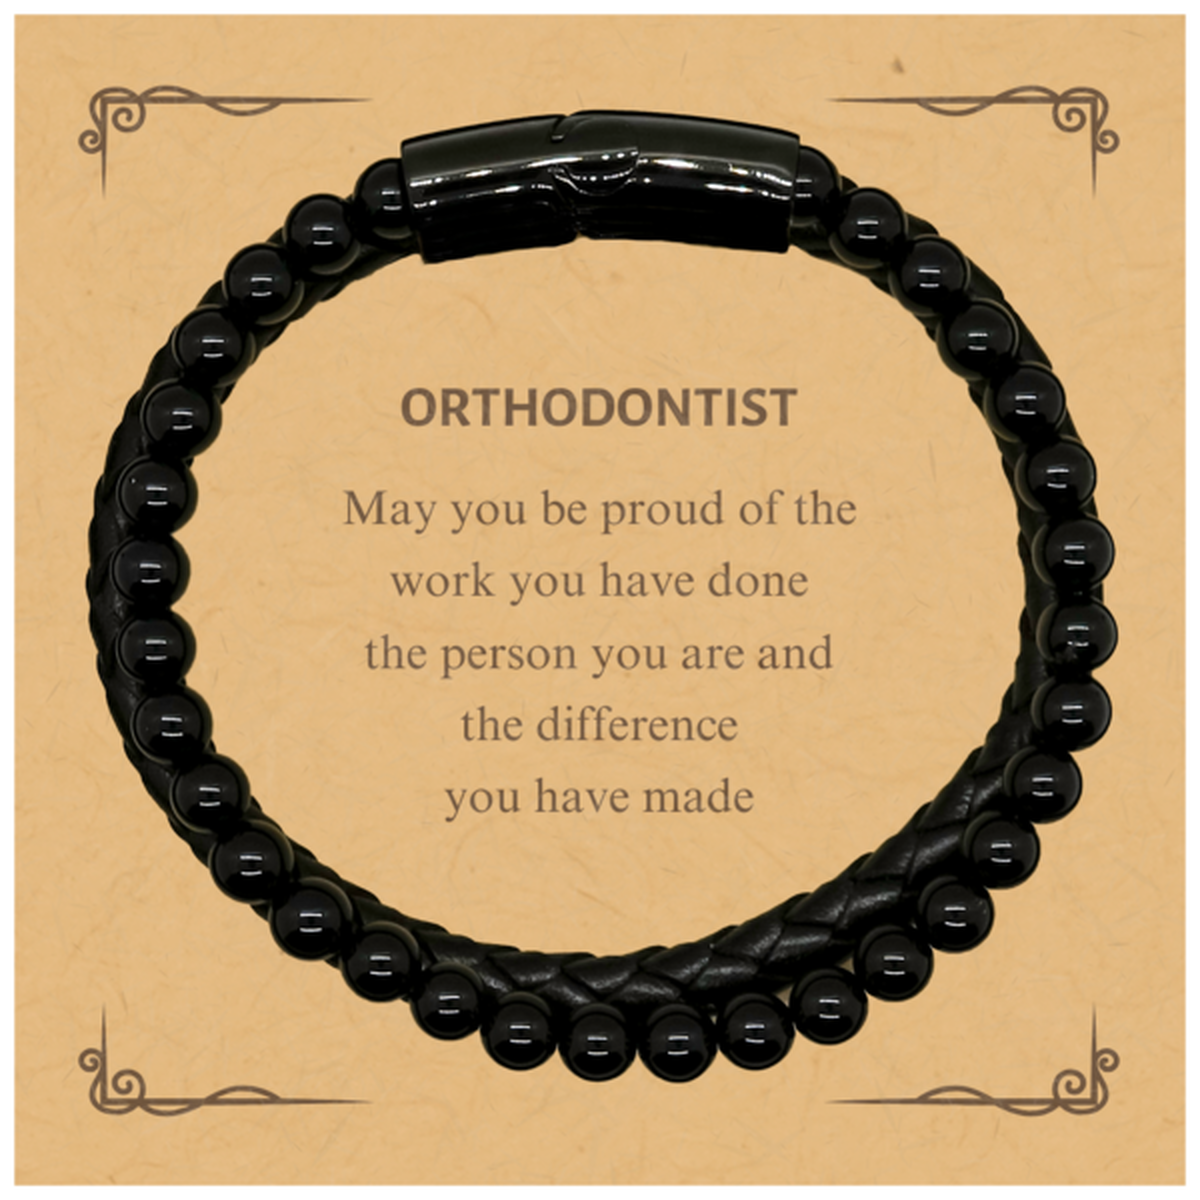 Orthodontist May you be proud of the work you have done, Retirement Orthodontist Stone Leather Bracelets for Colleague Appreciation Gifts Amazing for Orthodontist